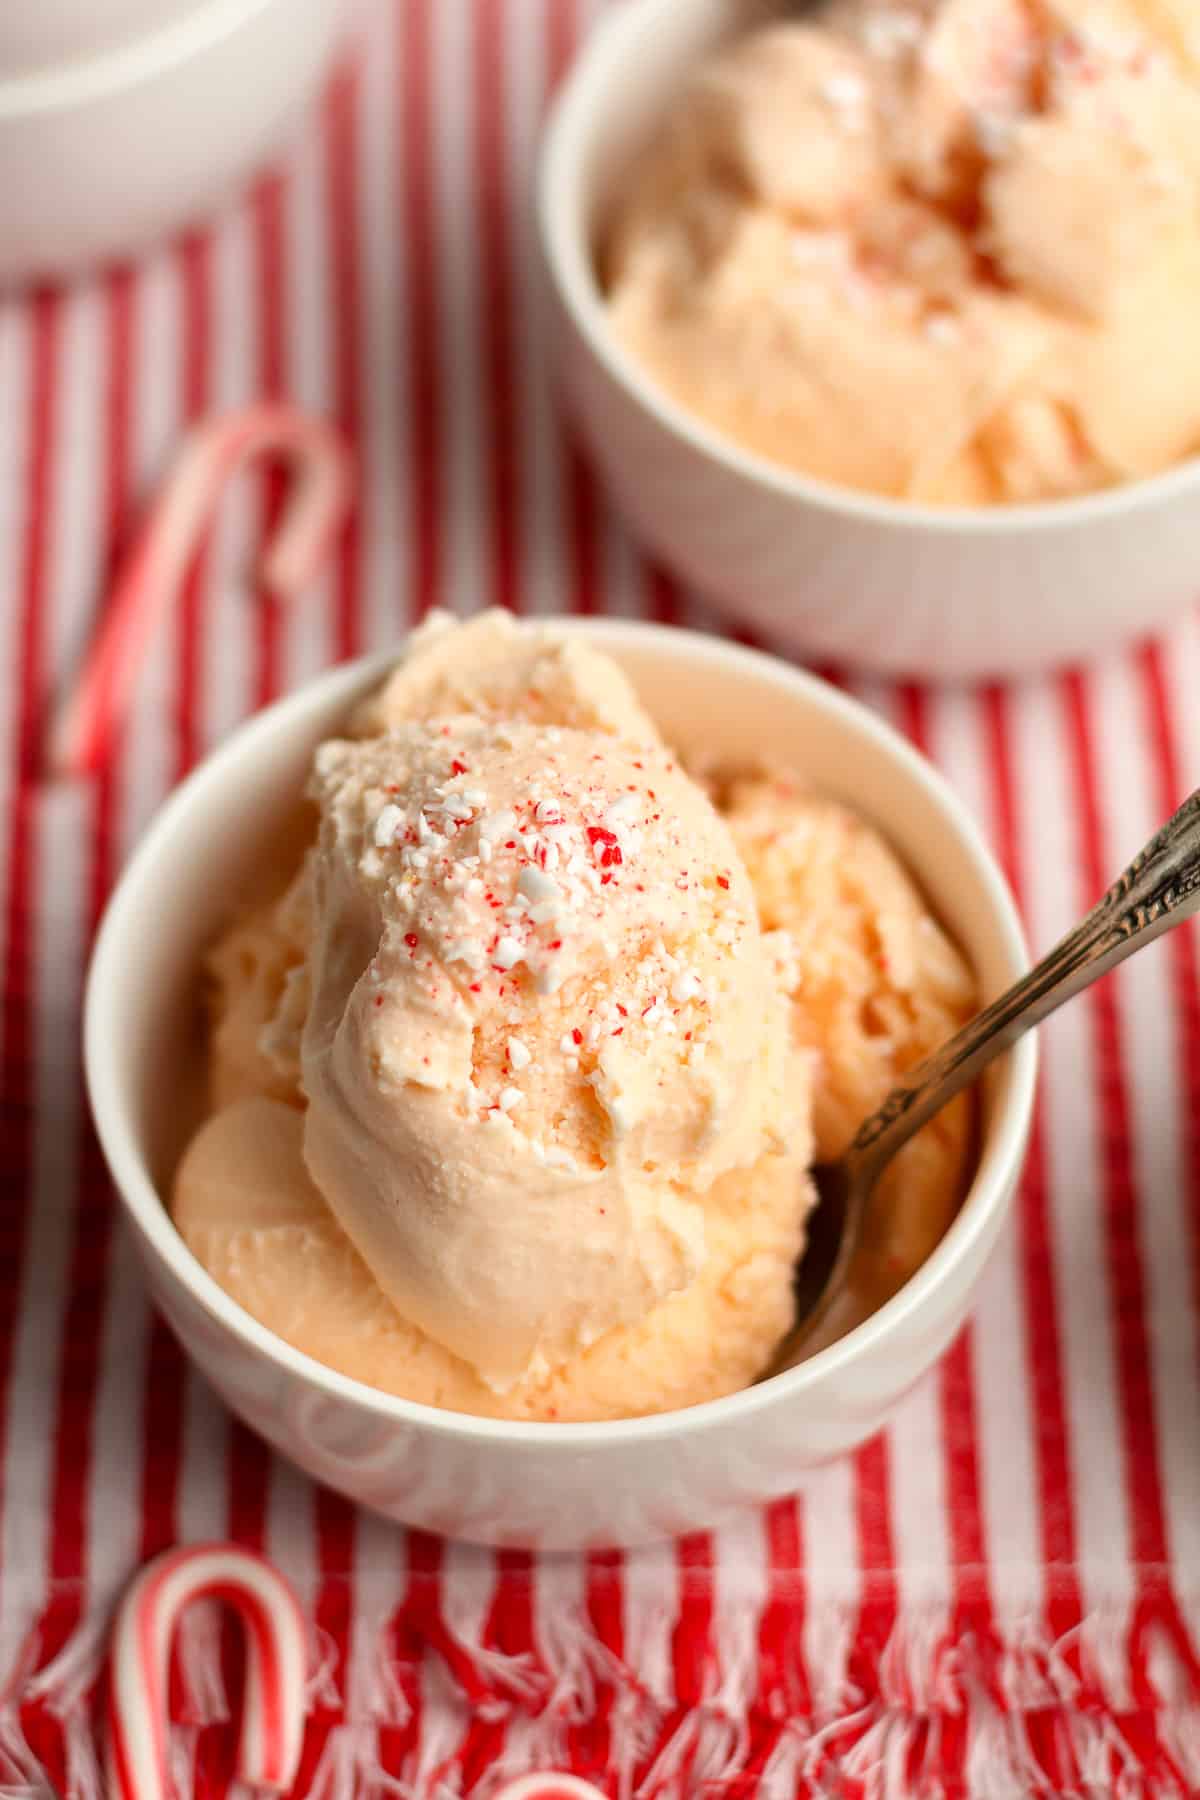 Two bowls of homemade peppermint stick ice cream.